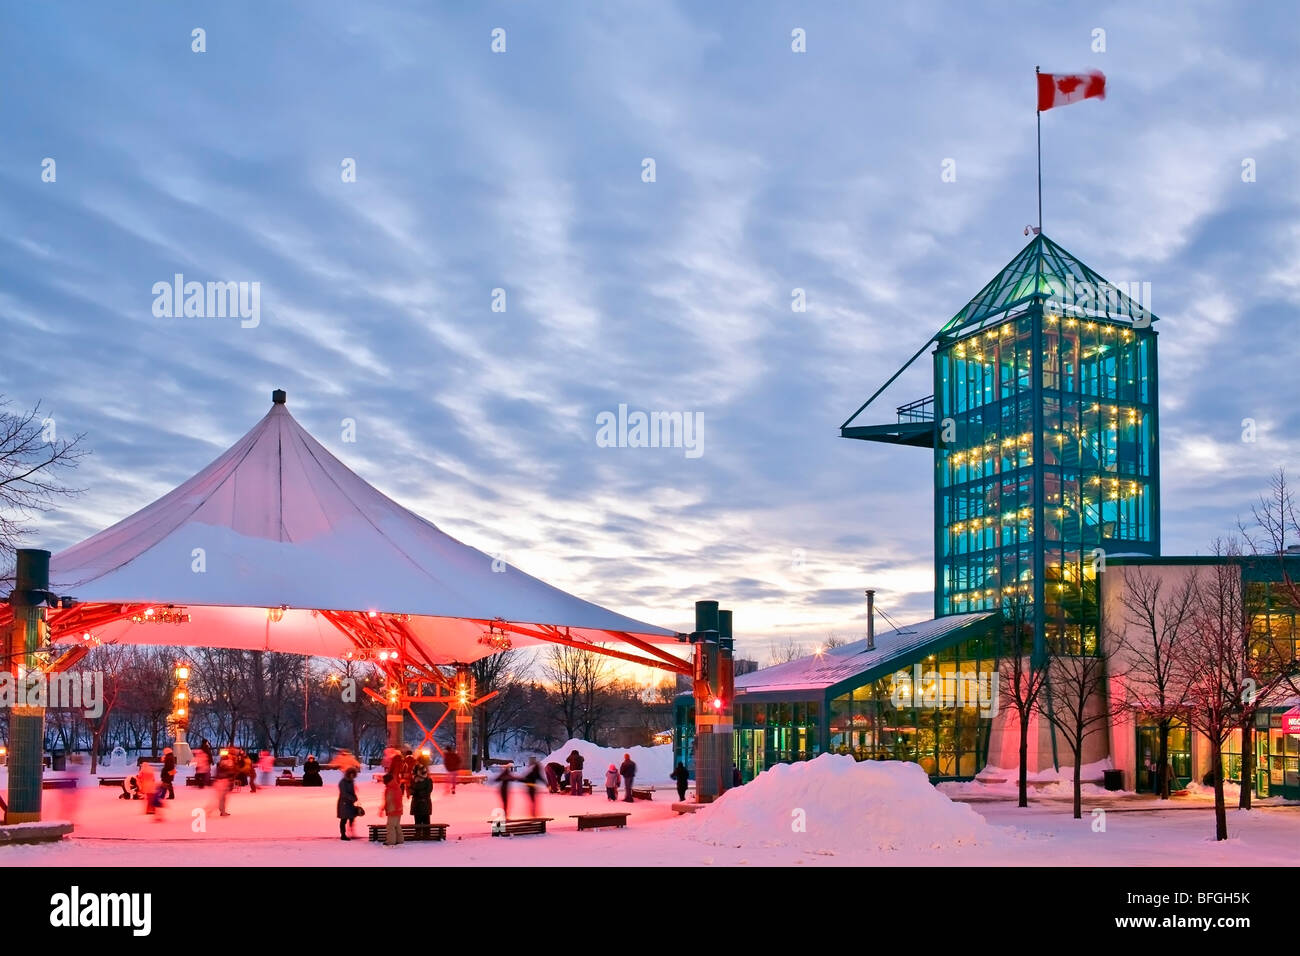 Ice Skaters under the Pavillion canopy at The Forks, Winnipeg, Manitoba, Canada Stock Photo